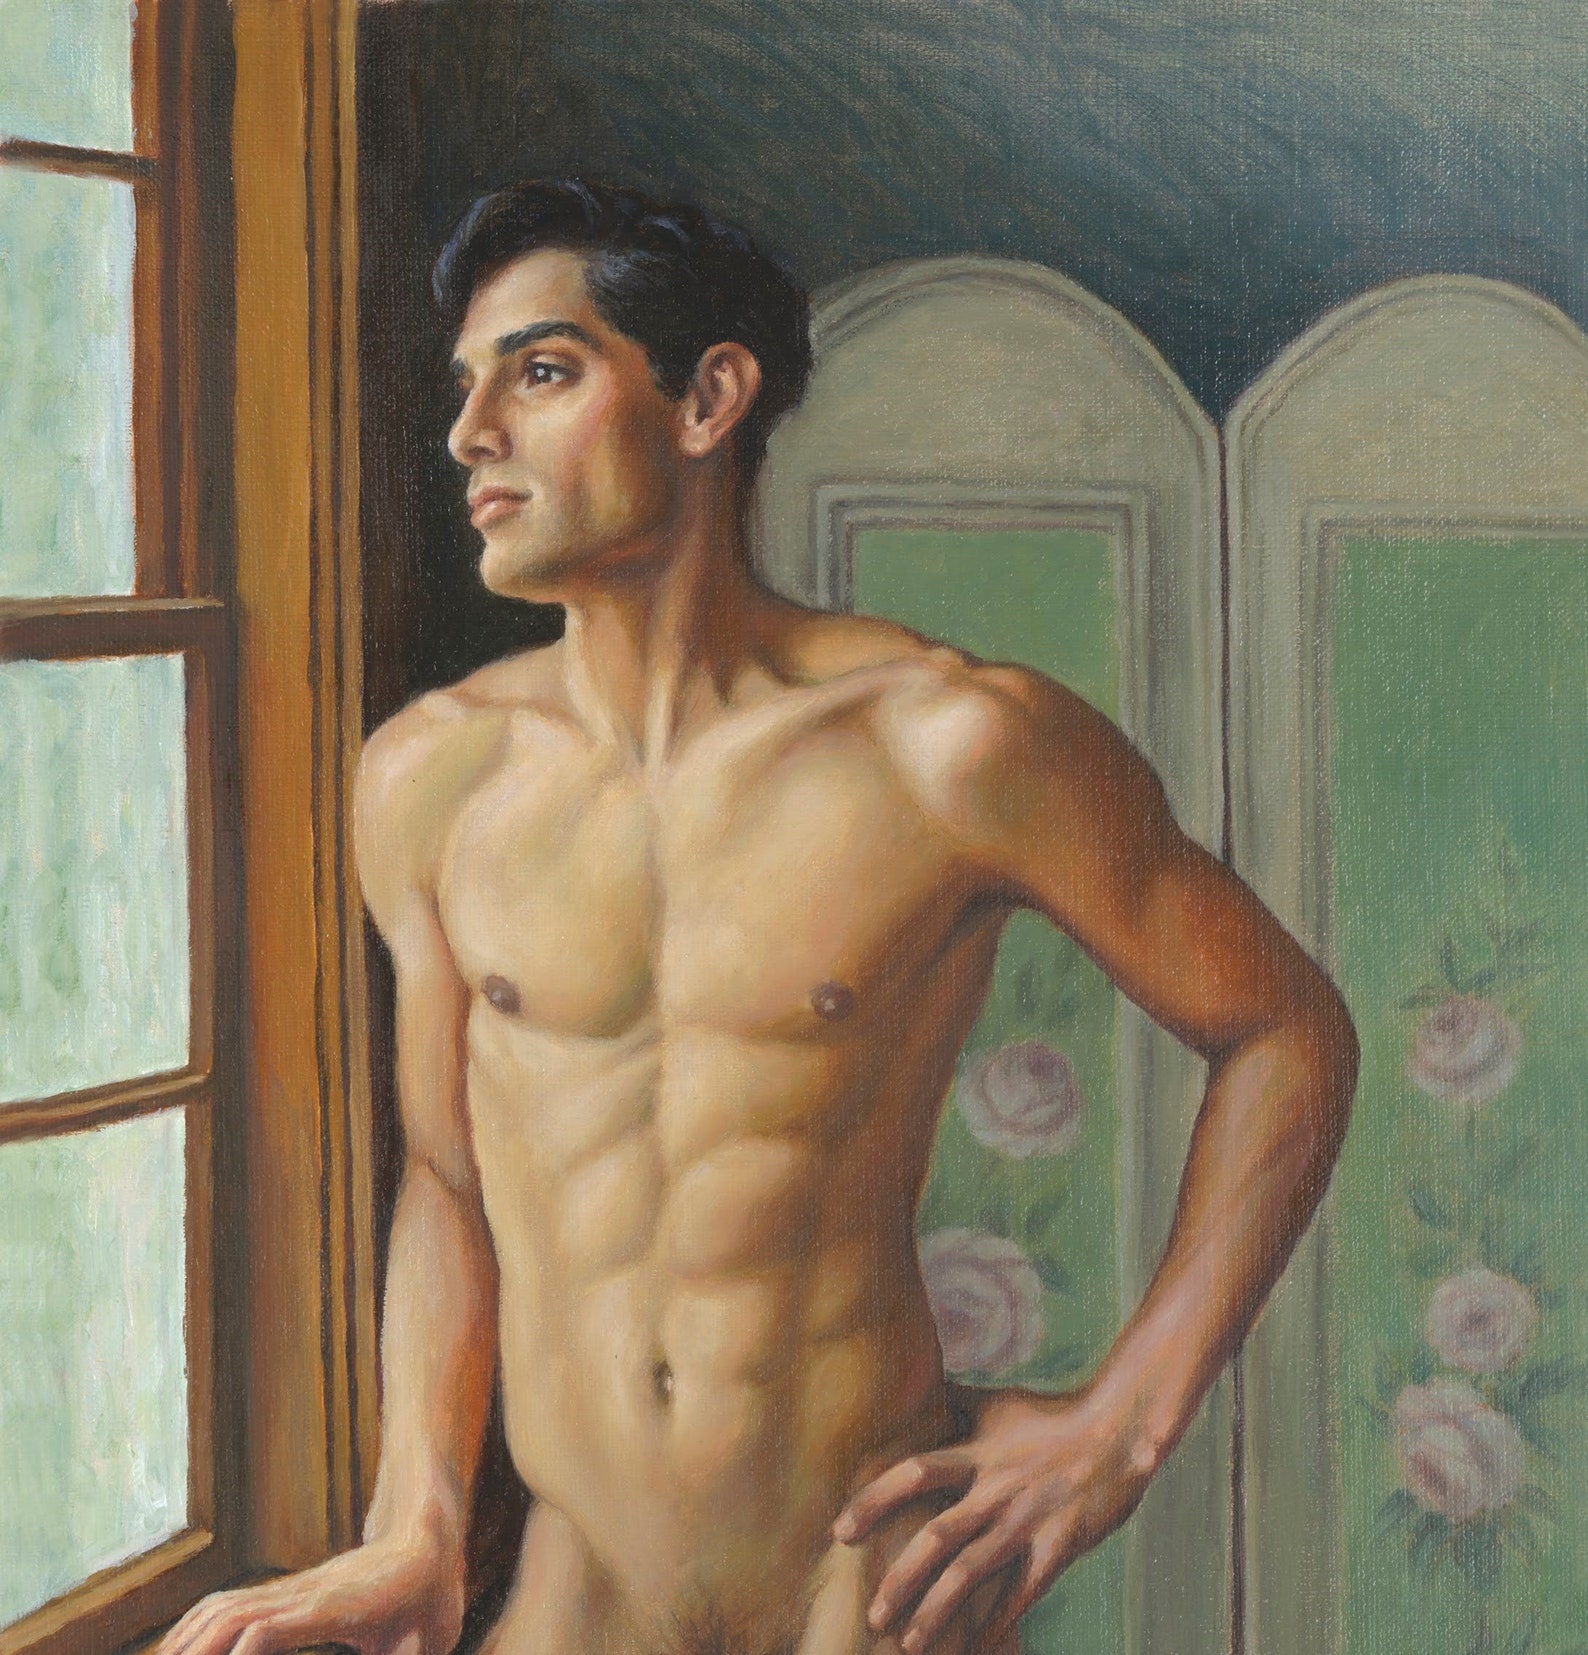 The man from the window nude